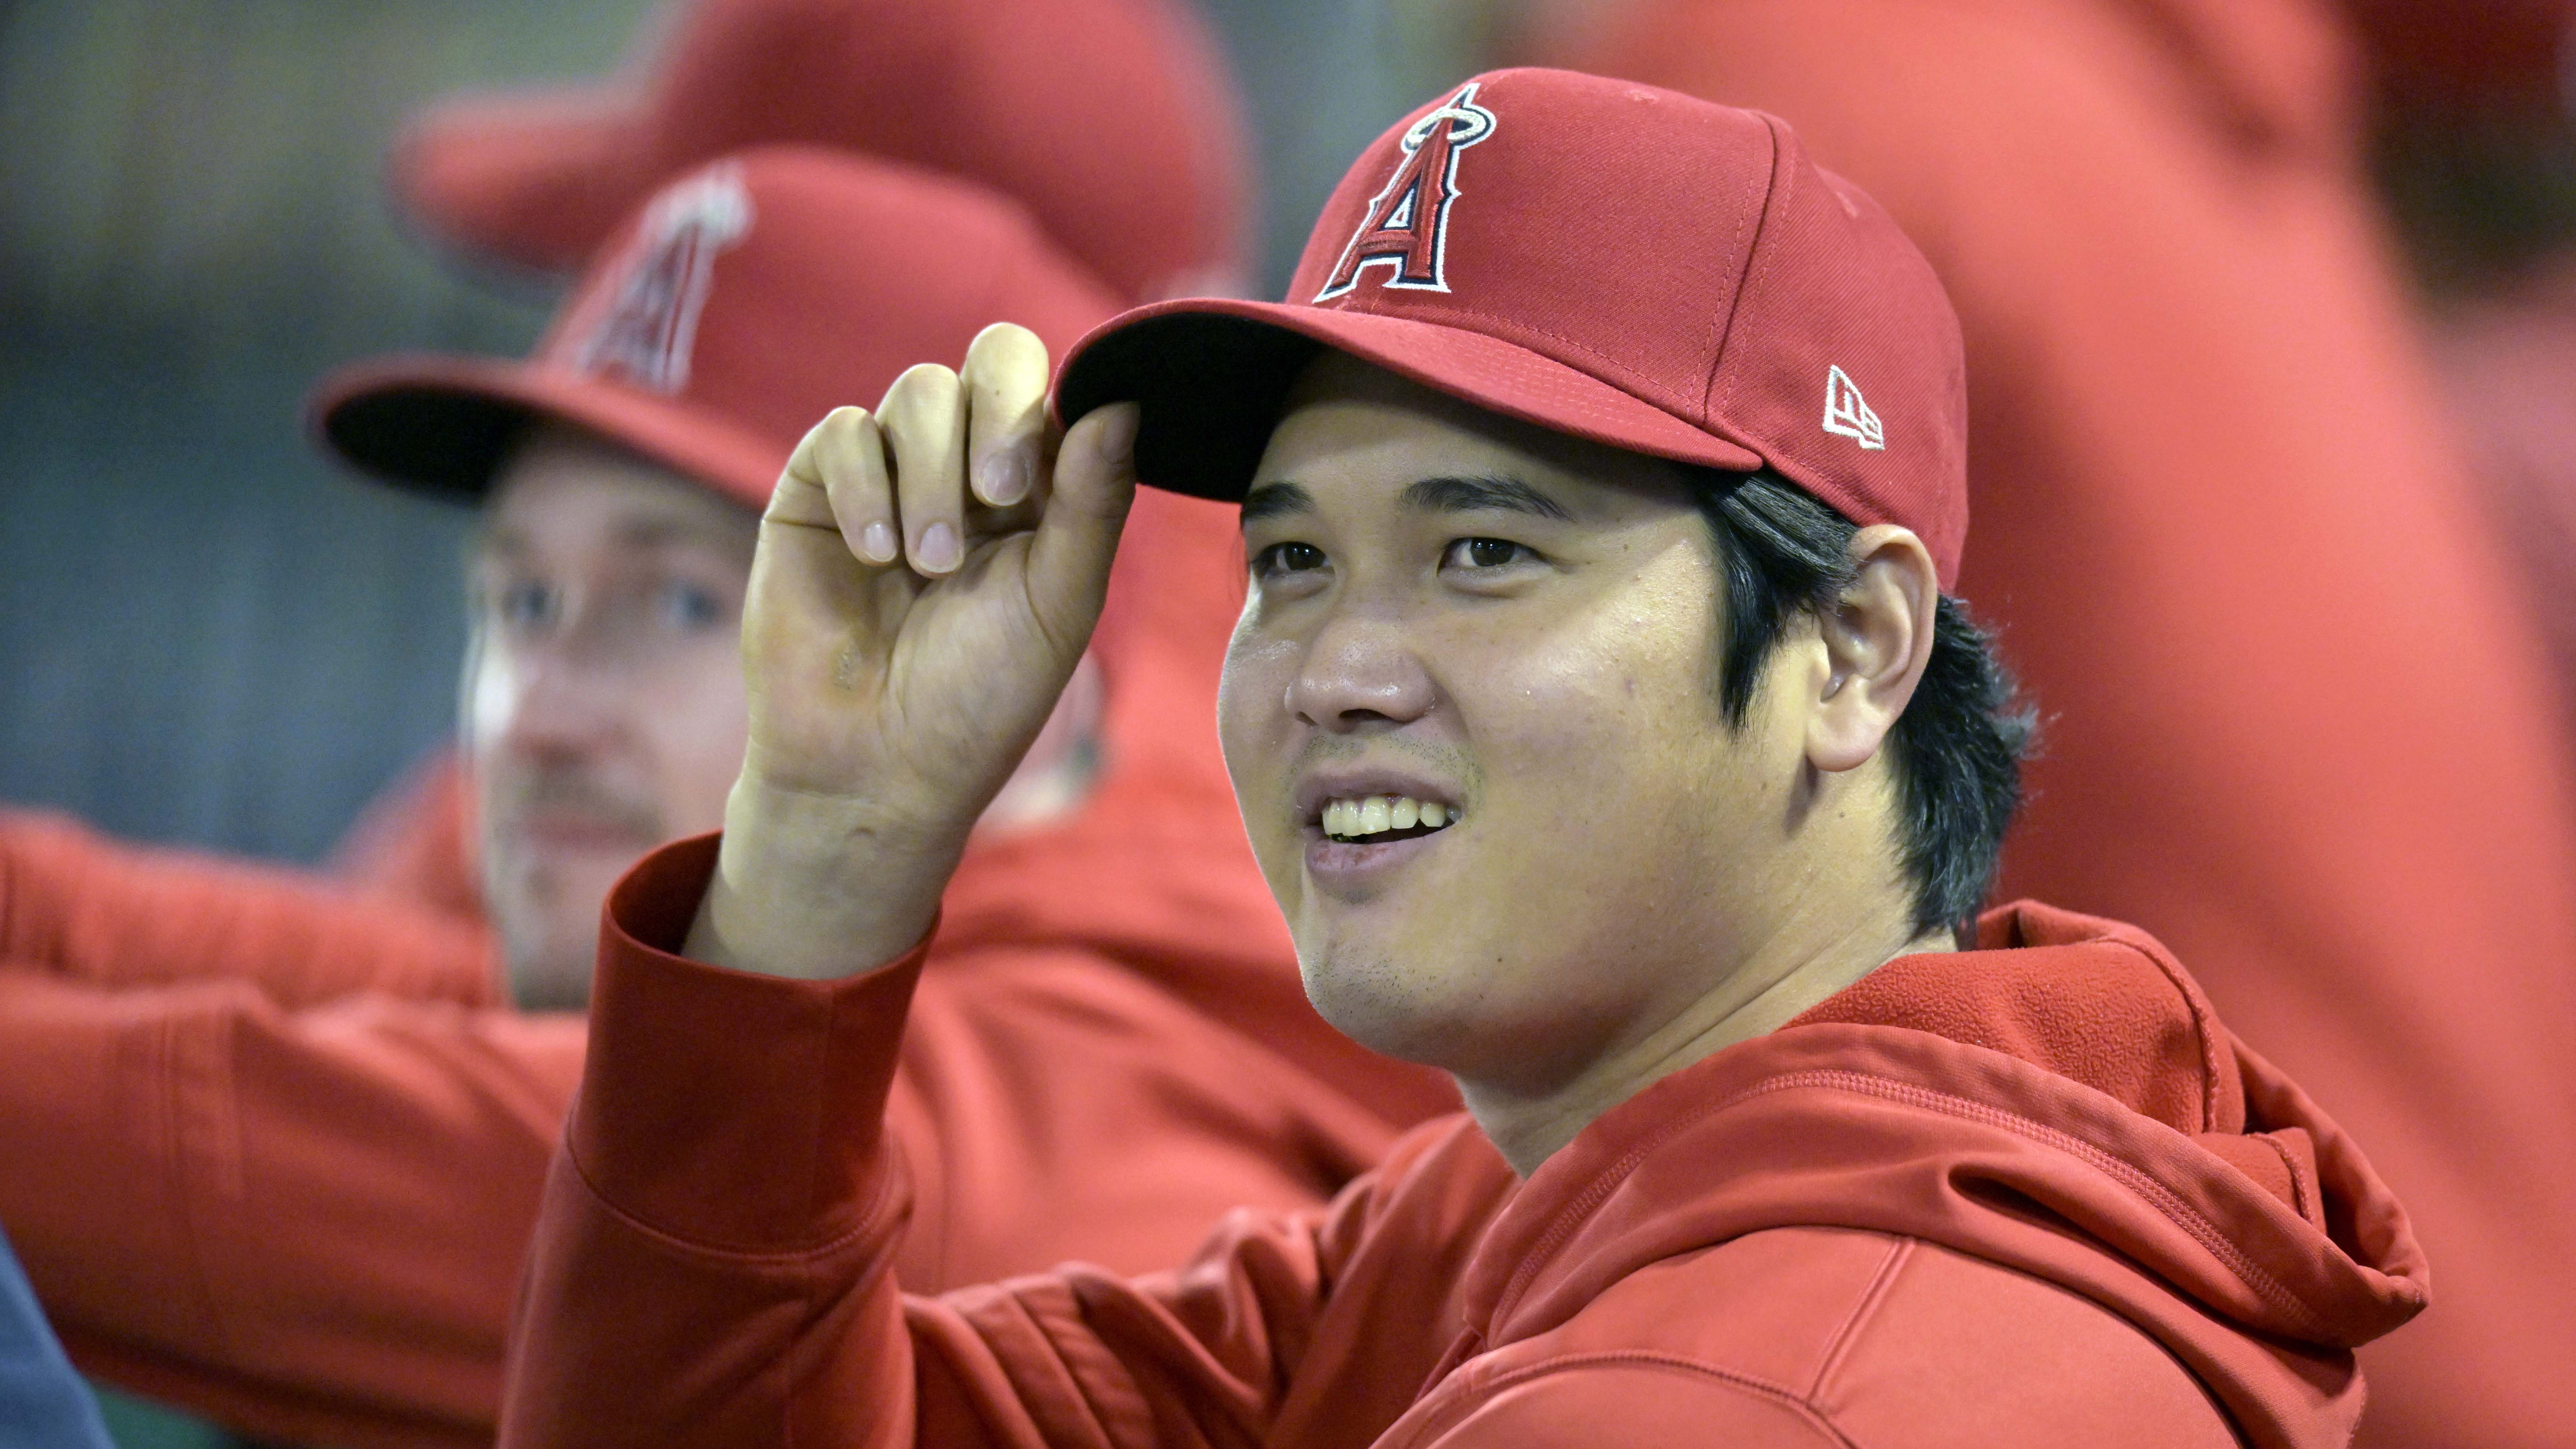 Shohei Ohtani won't pitch until 2025 after undergoing surgery 